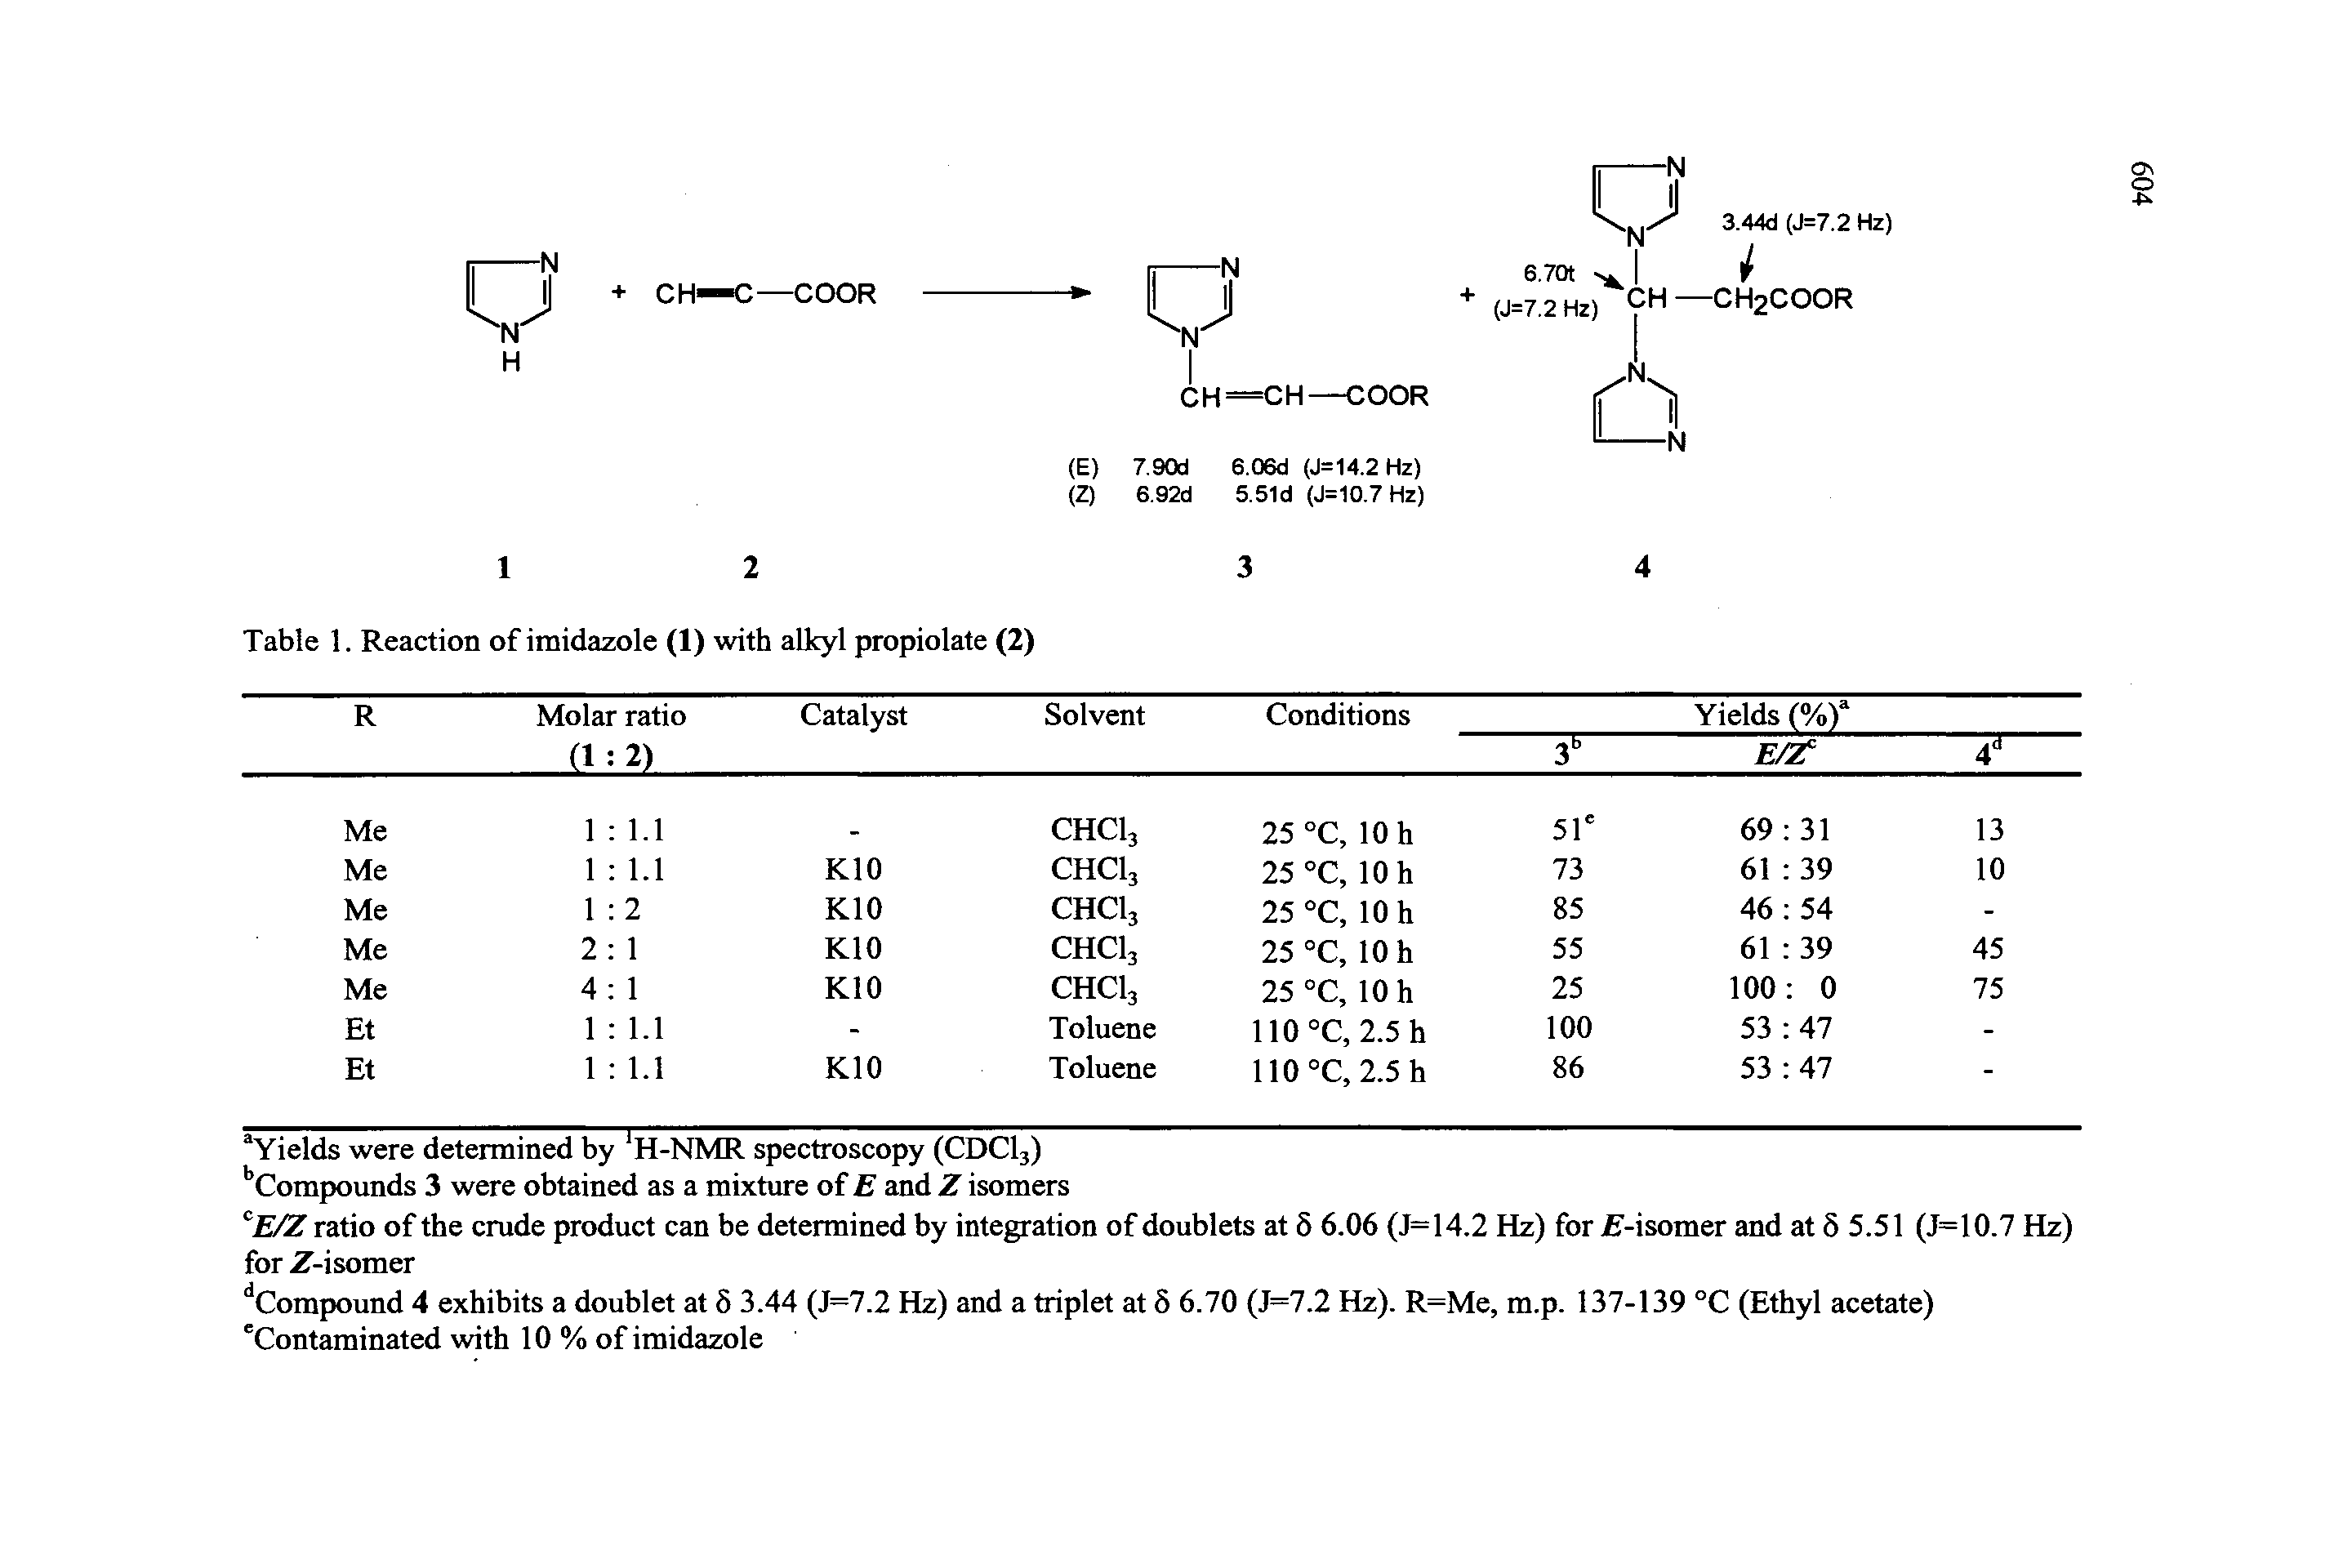 Table 1. Reaction of imidazole (1) with alkyl propiolate (2)...